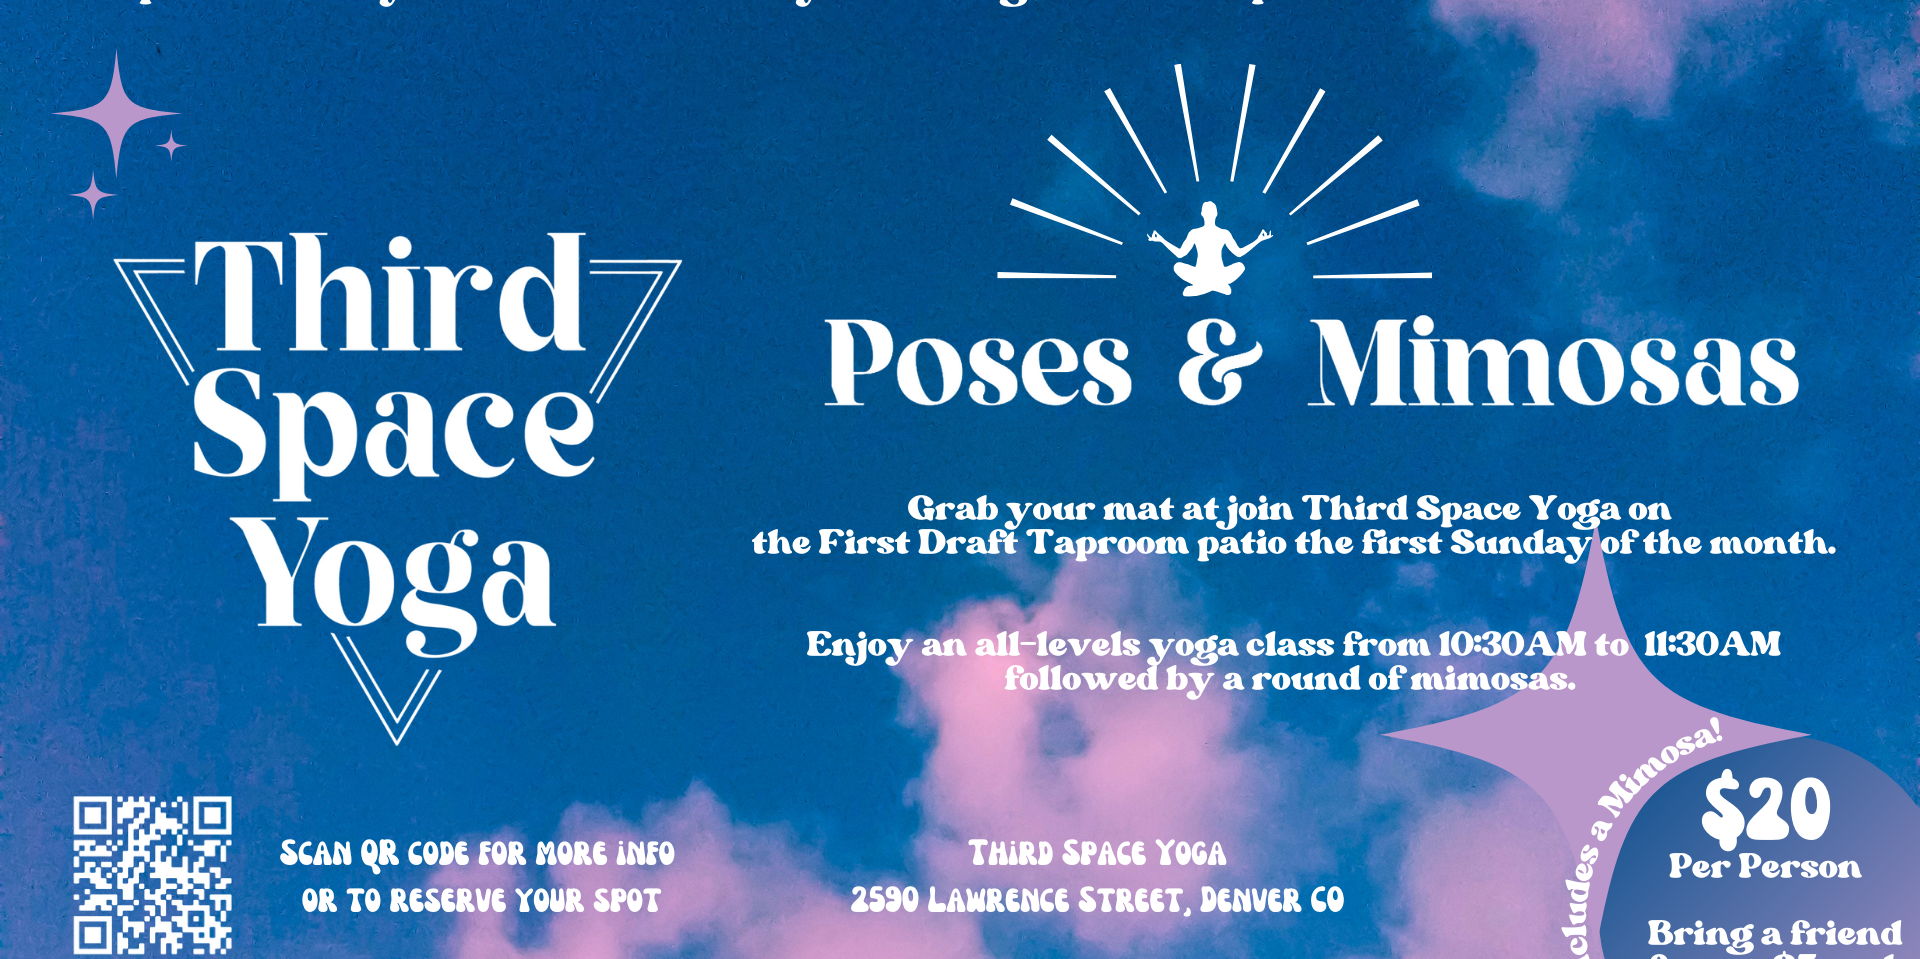 Poses and Mimosas presented by Third Space Yoga promotional image